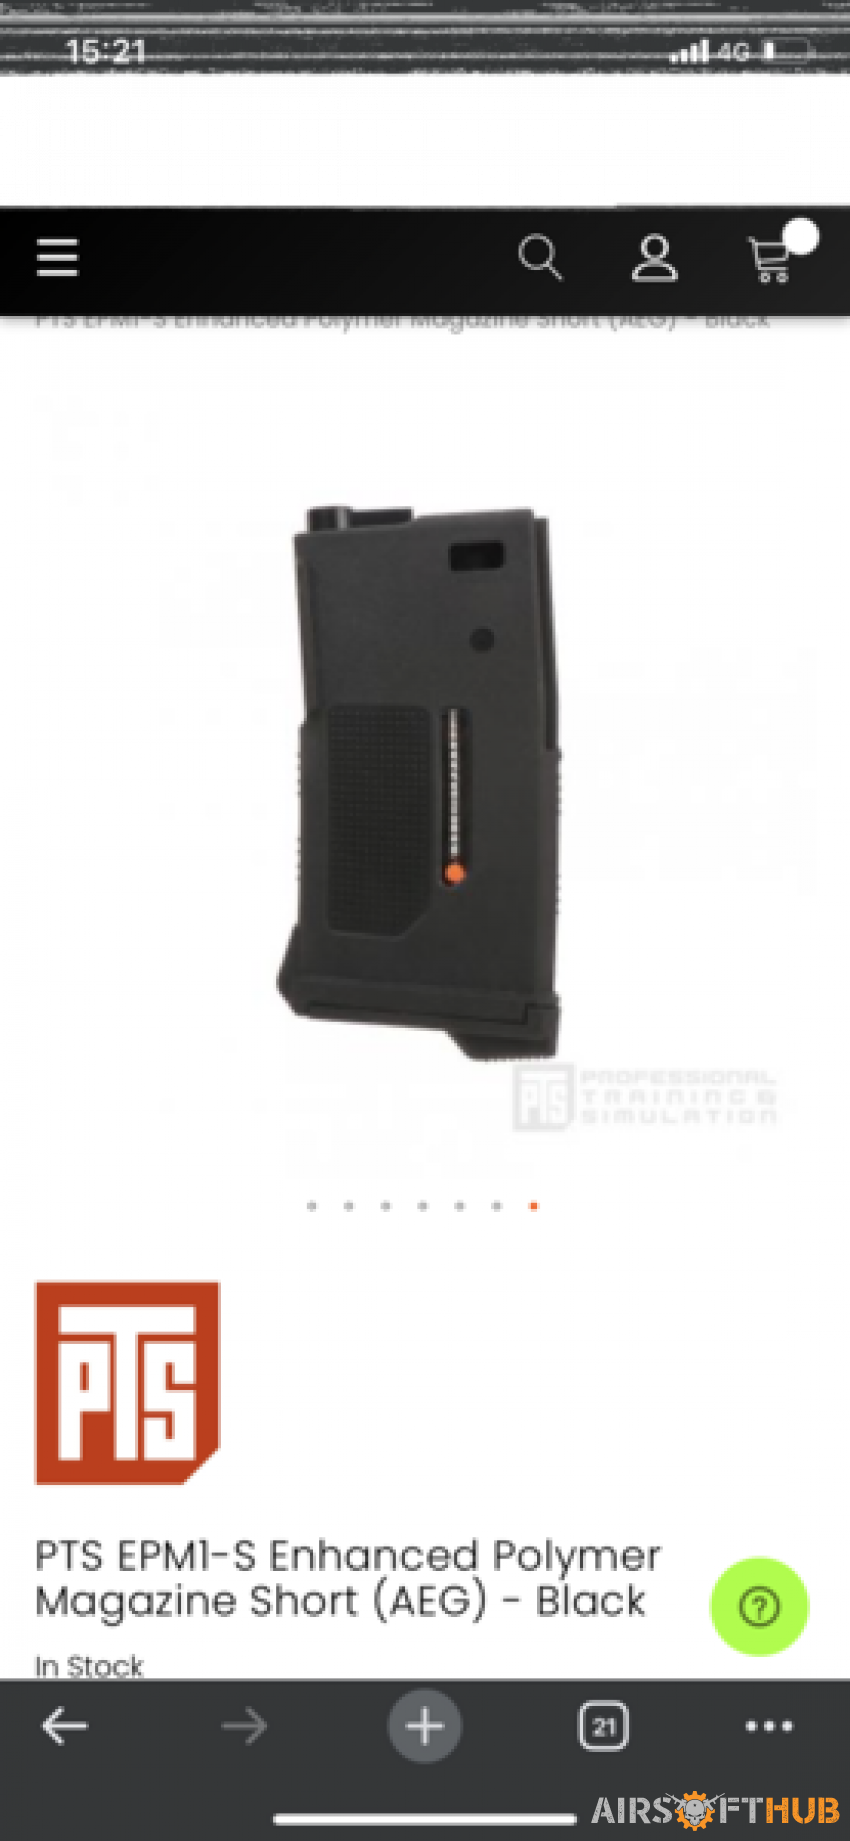 M4 stubby mags - Used airsoft equipment